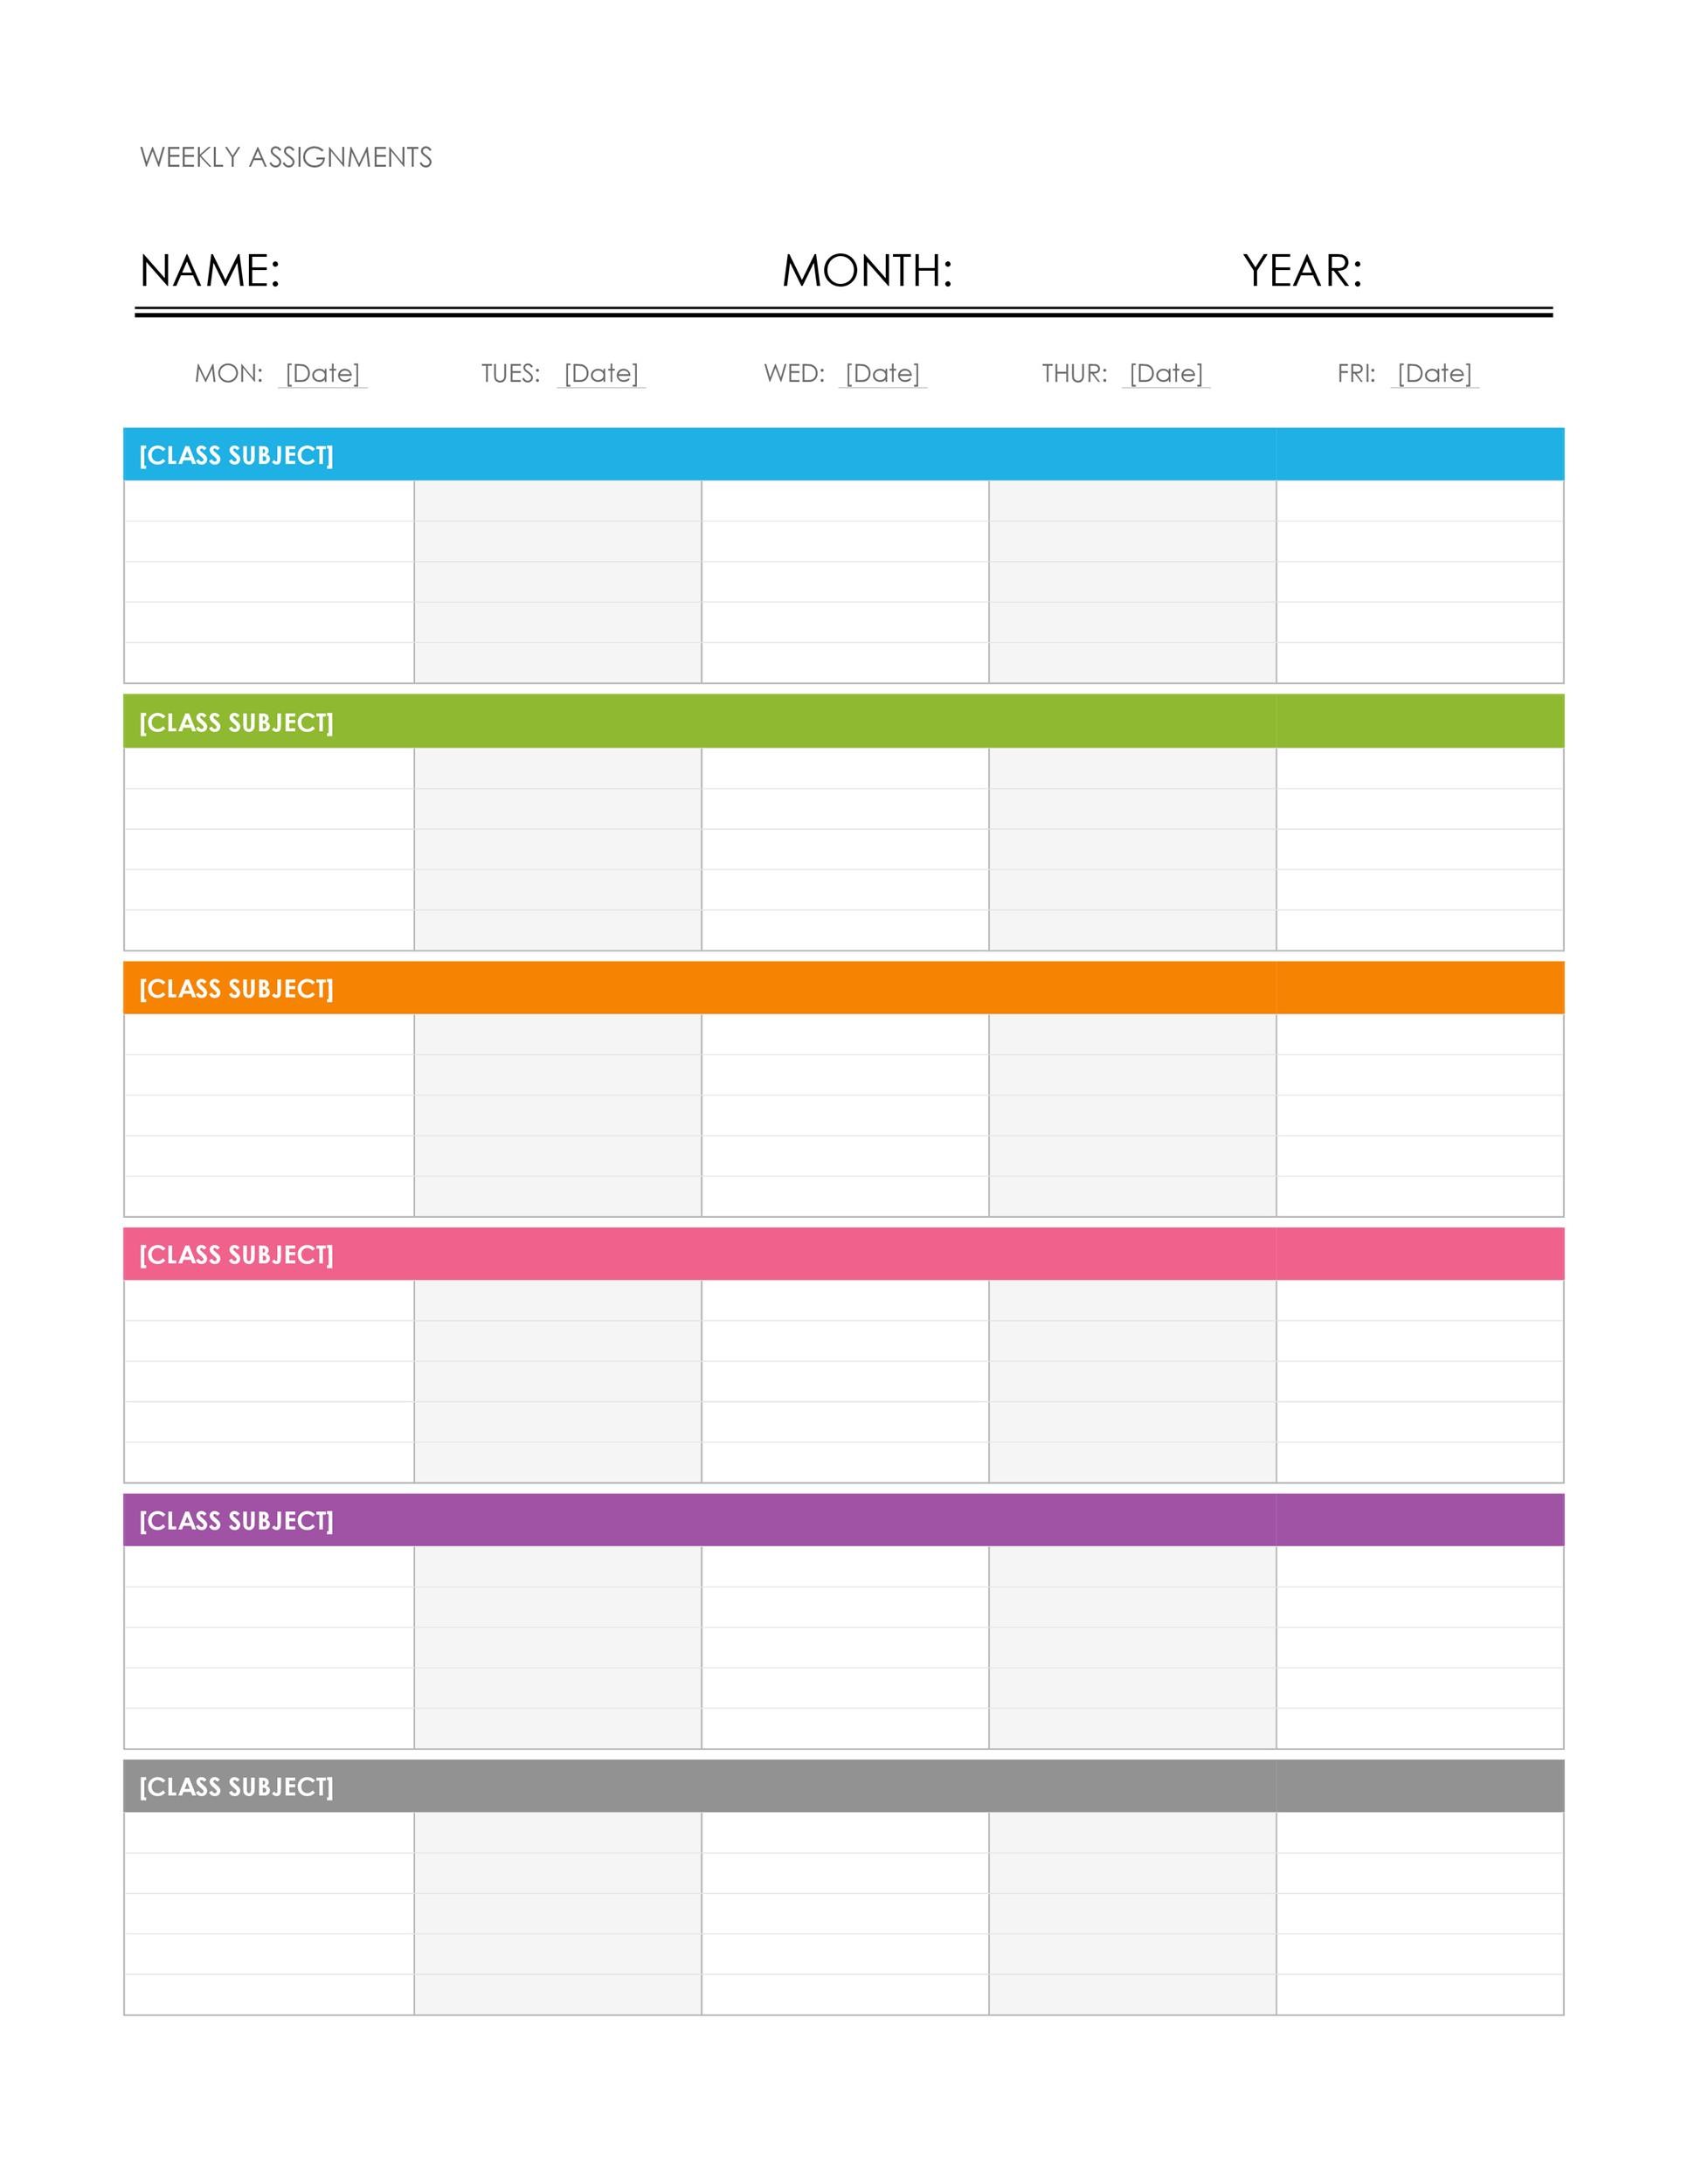 printable-downloadable-weekly-schedule-template-printable-templates